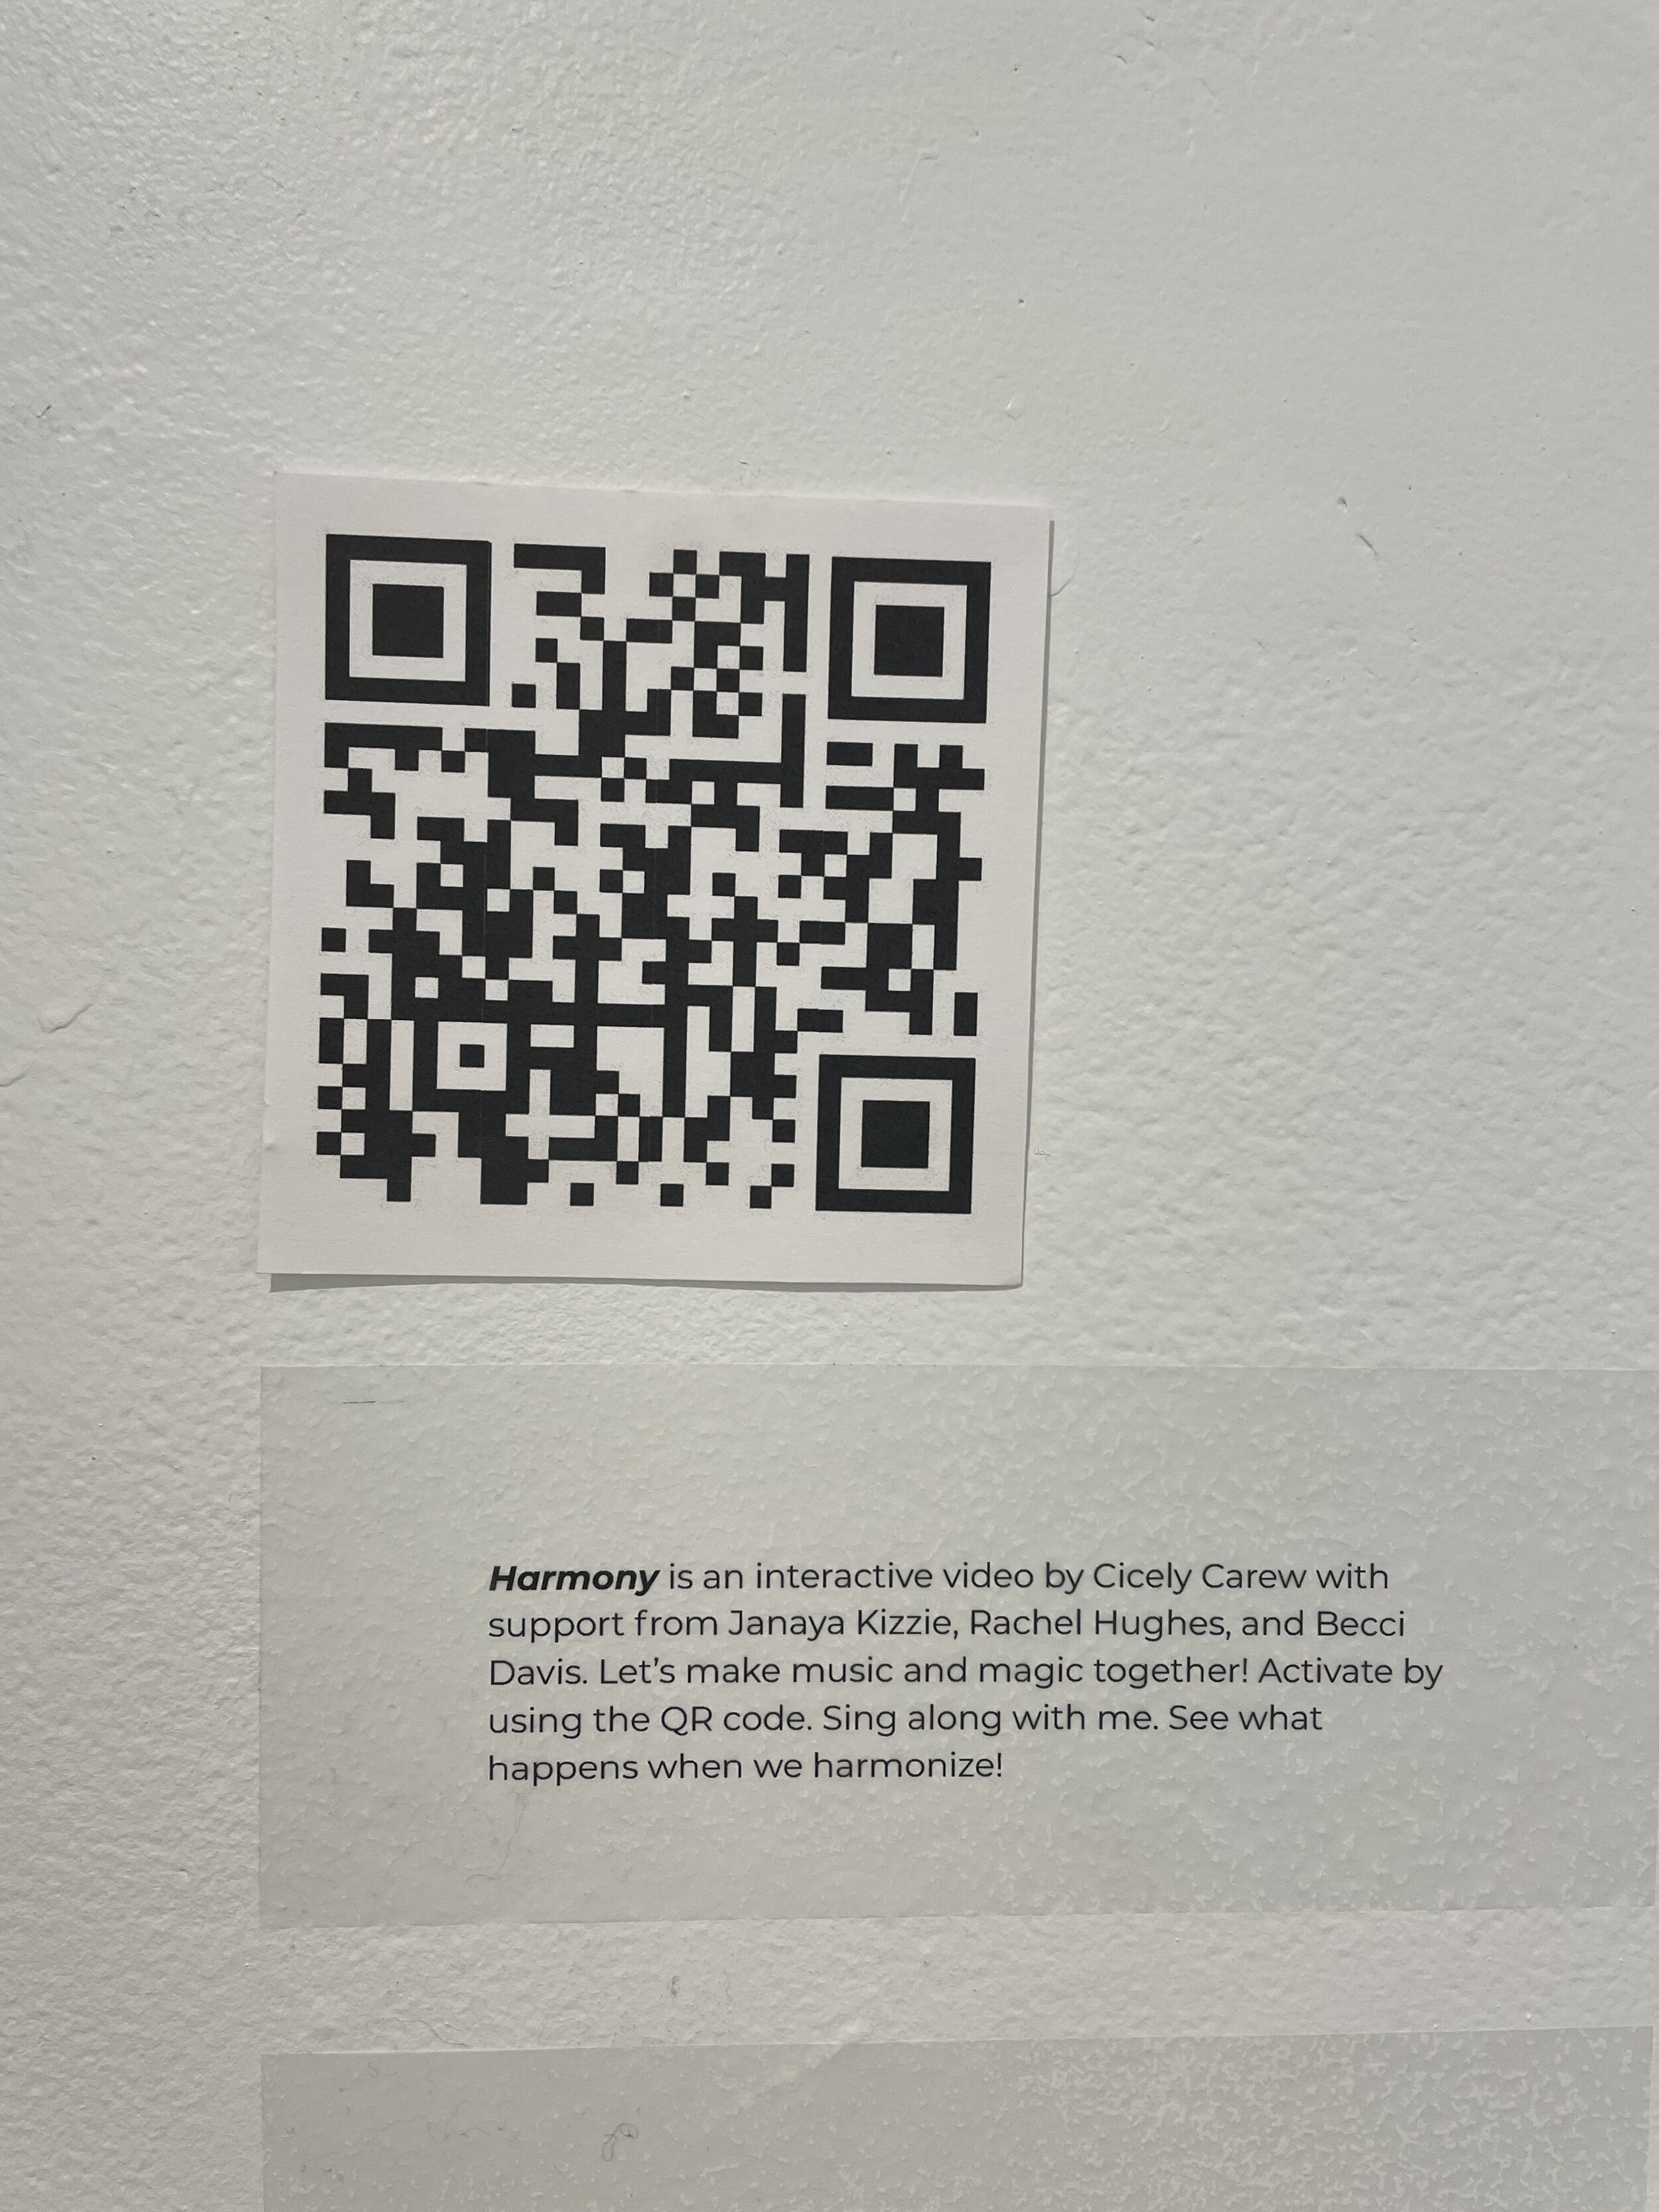 Play along with the QR Code!